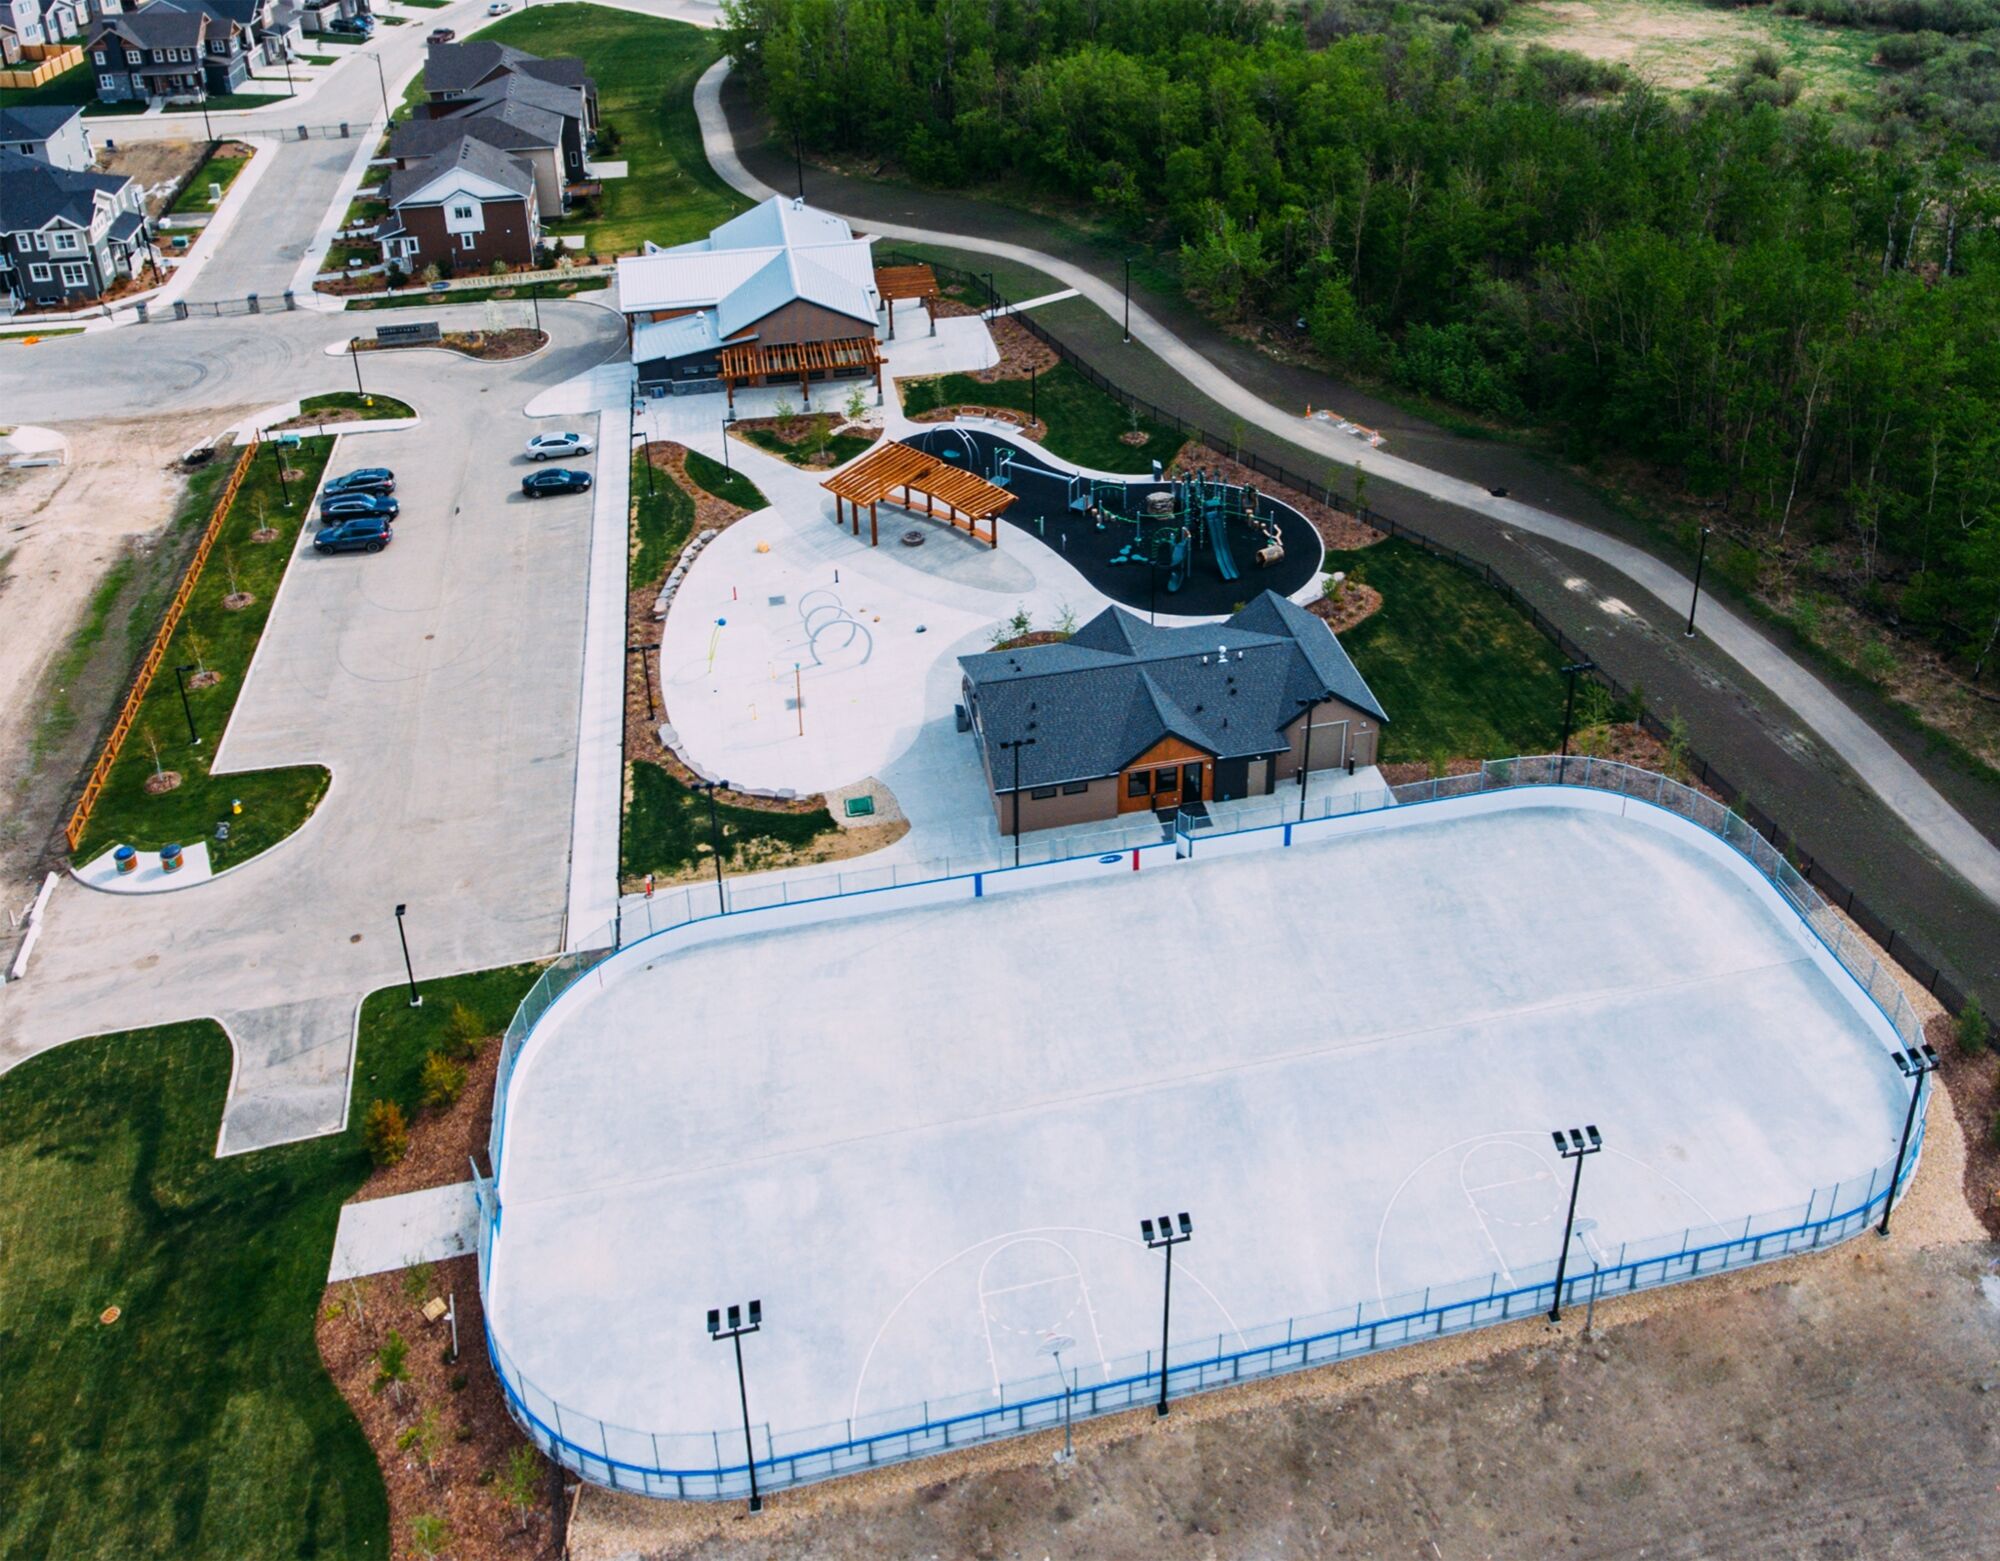 An overhead view of a parkette and an outdoor ice rink.